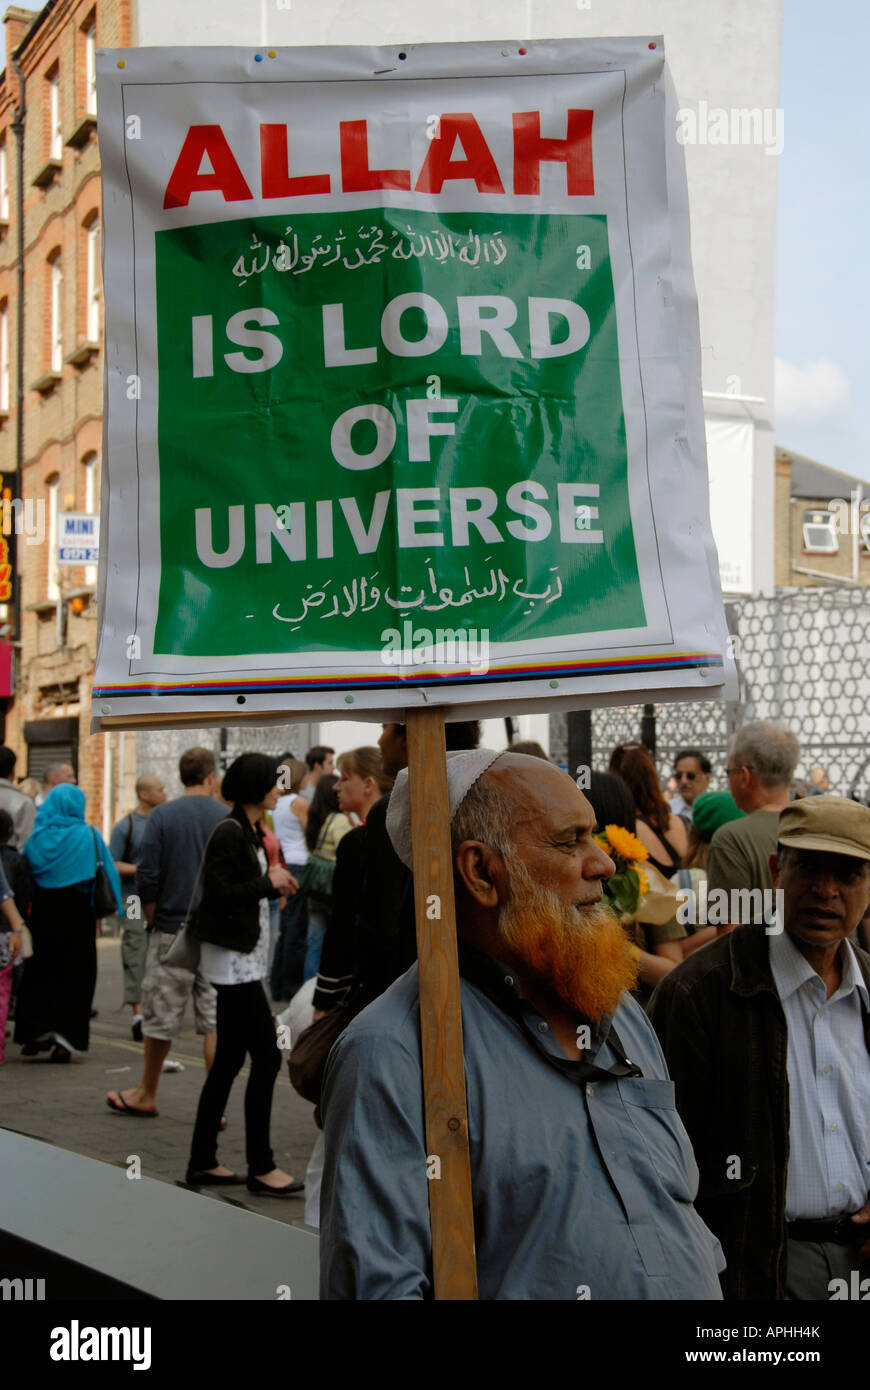 Muslim man with cardboard sign pronouncing Allah Lord of Universe. Stock Photo